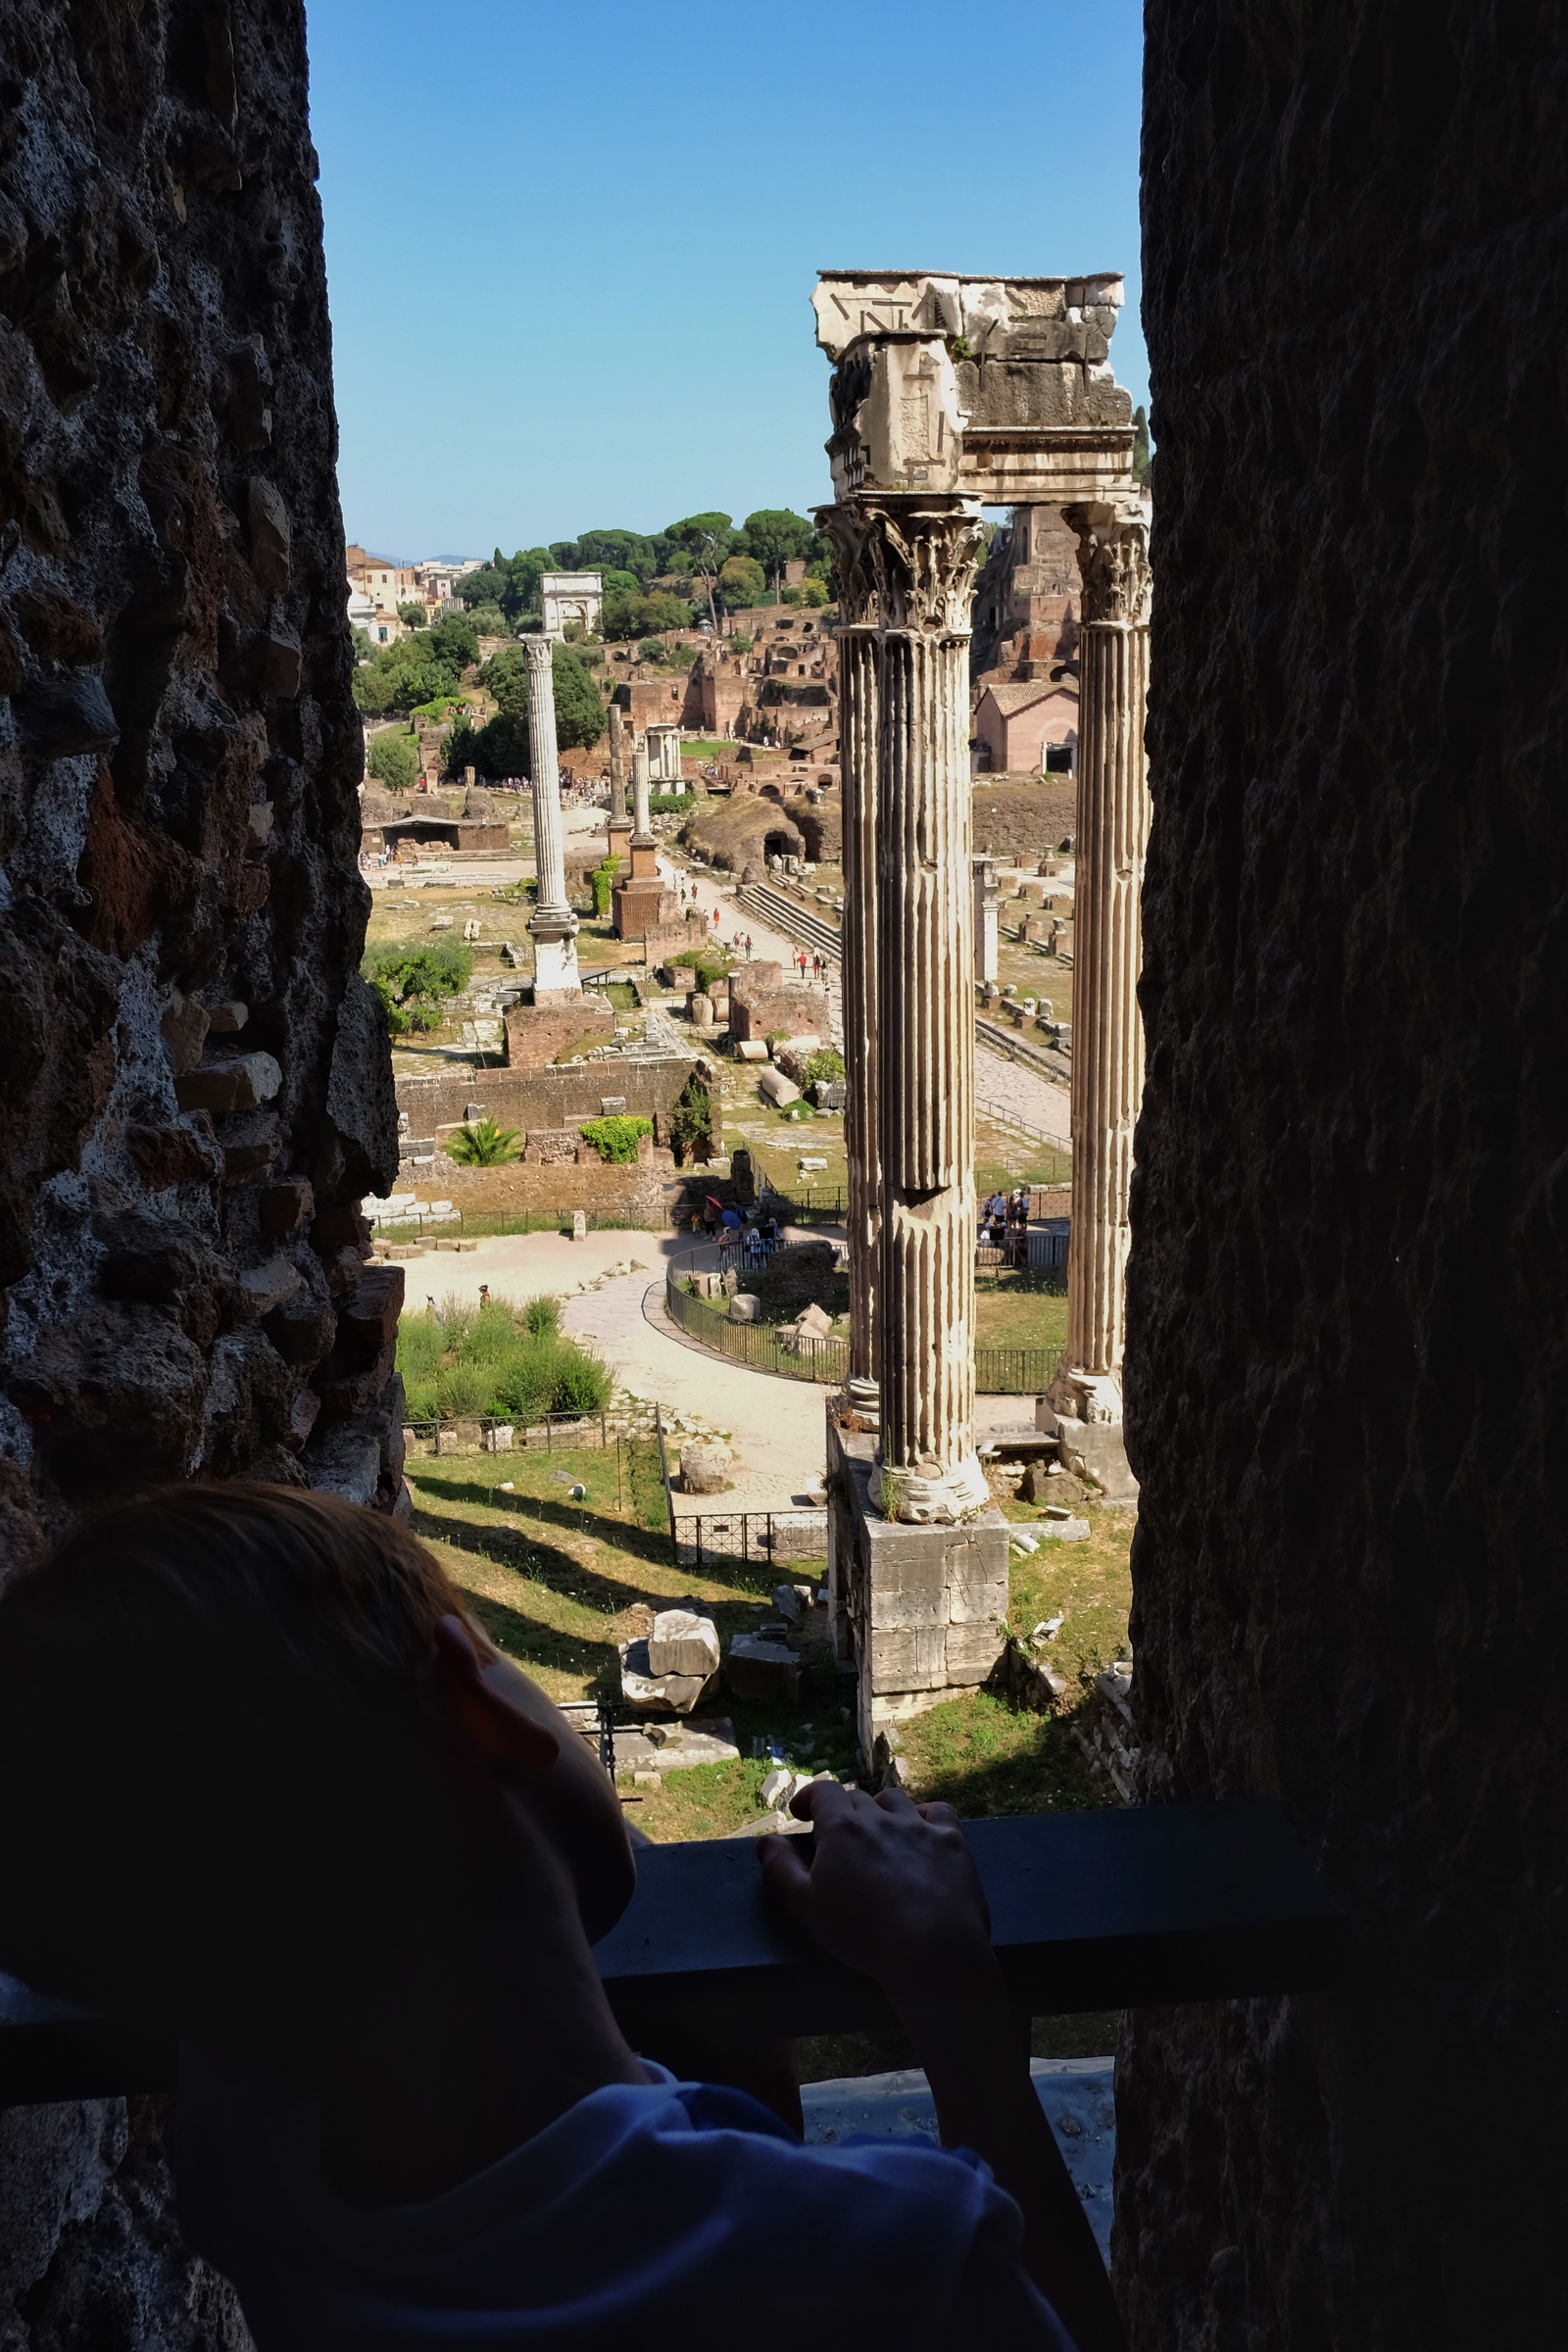 Rowan looking down on the Roman Forum from the Capitolini Museums.